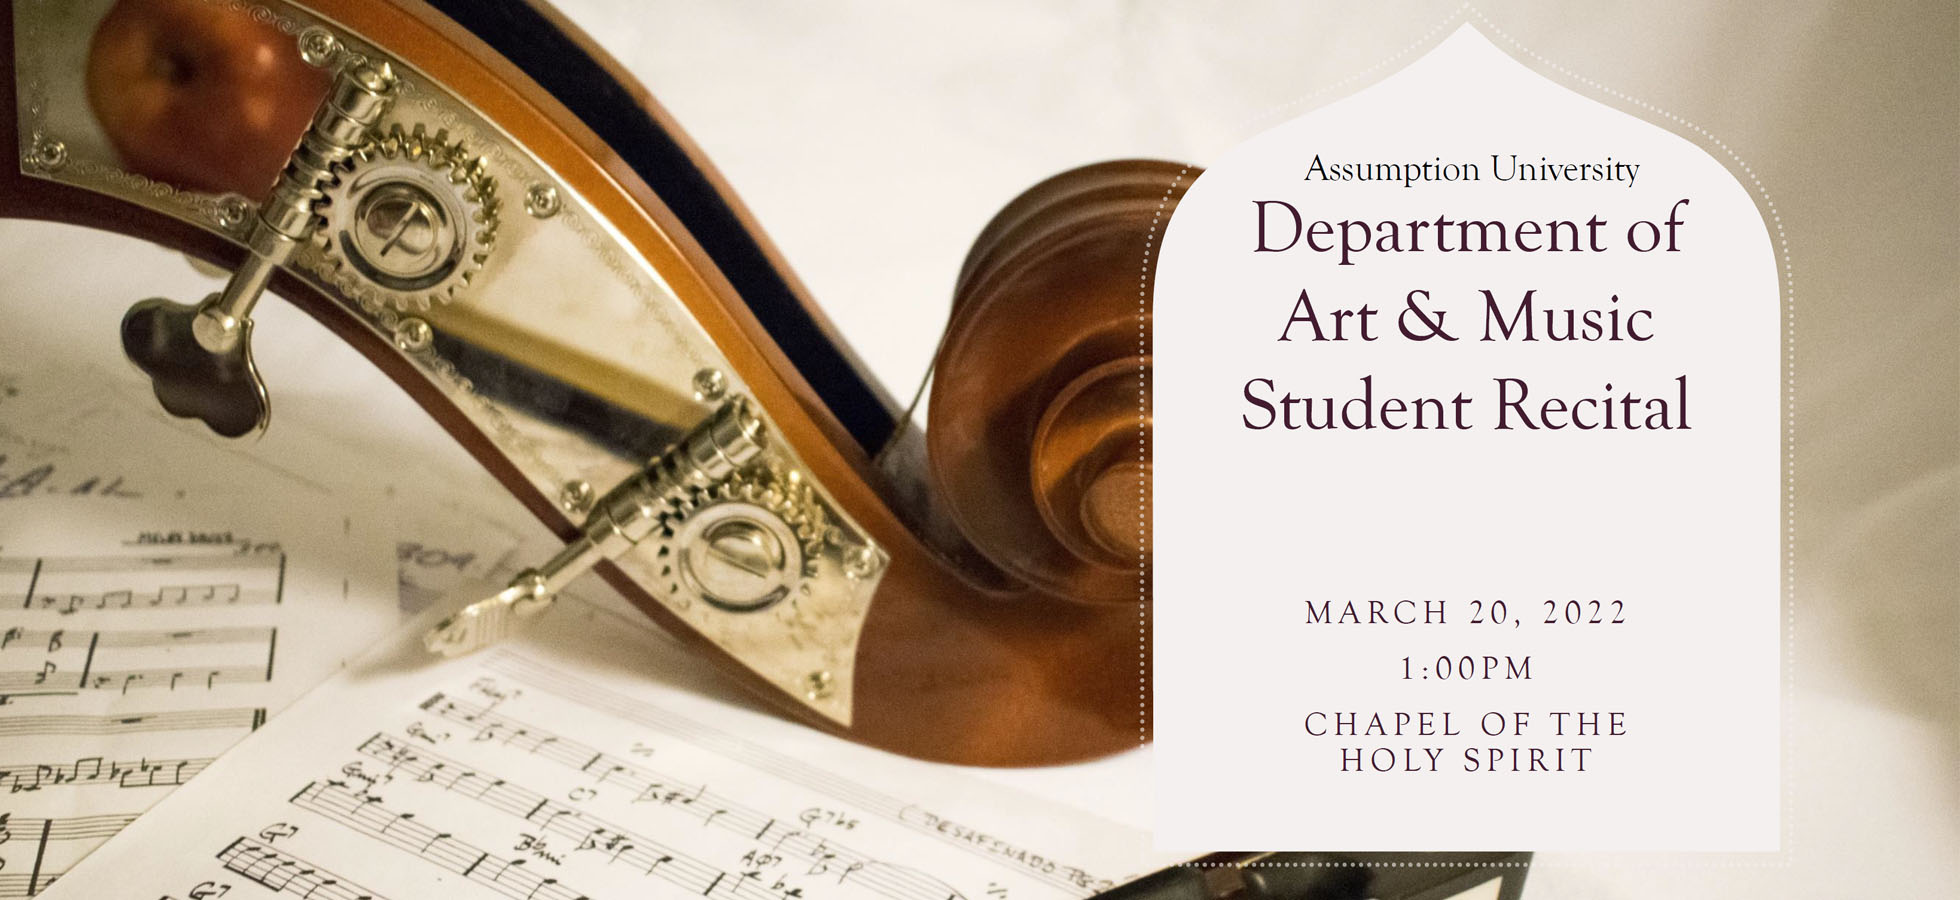 Graphic to promote the Sunday, March 20 Assumption student recital in the Chapel of the Holy Spirit.